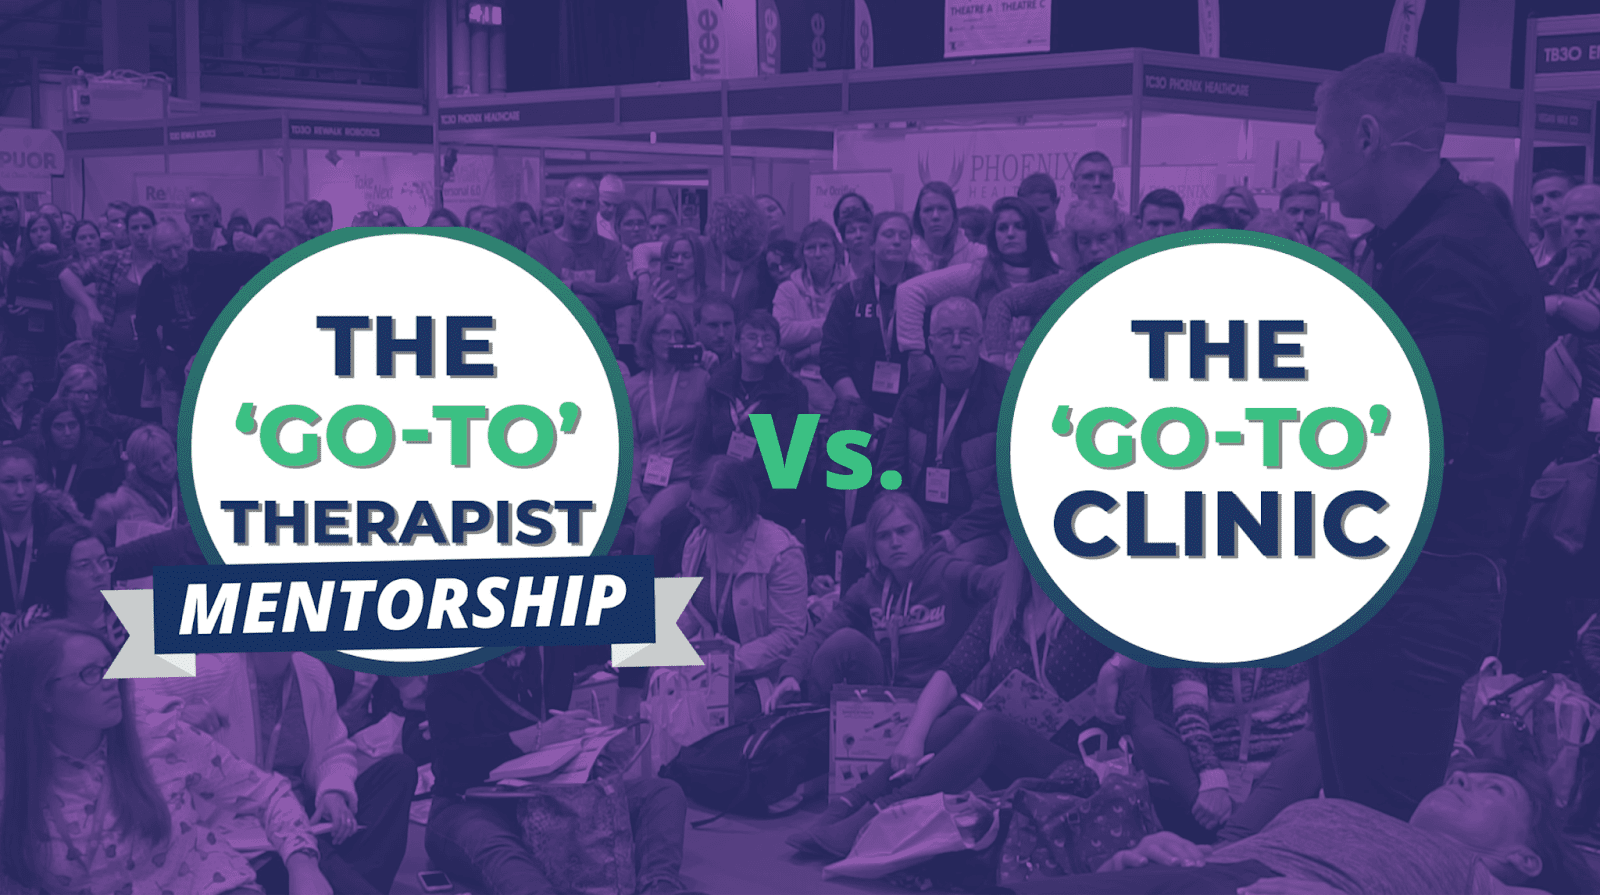 What's The Difference Between The 'Go-To' Physio Mentorship And 'Go-To' Clinic Mastermind Programs?